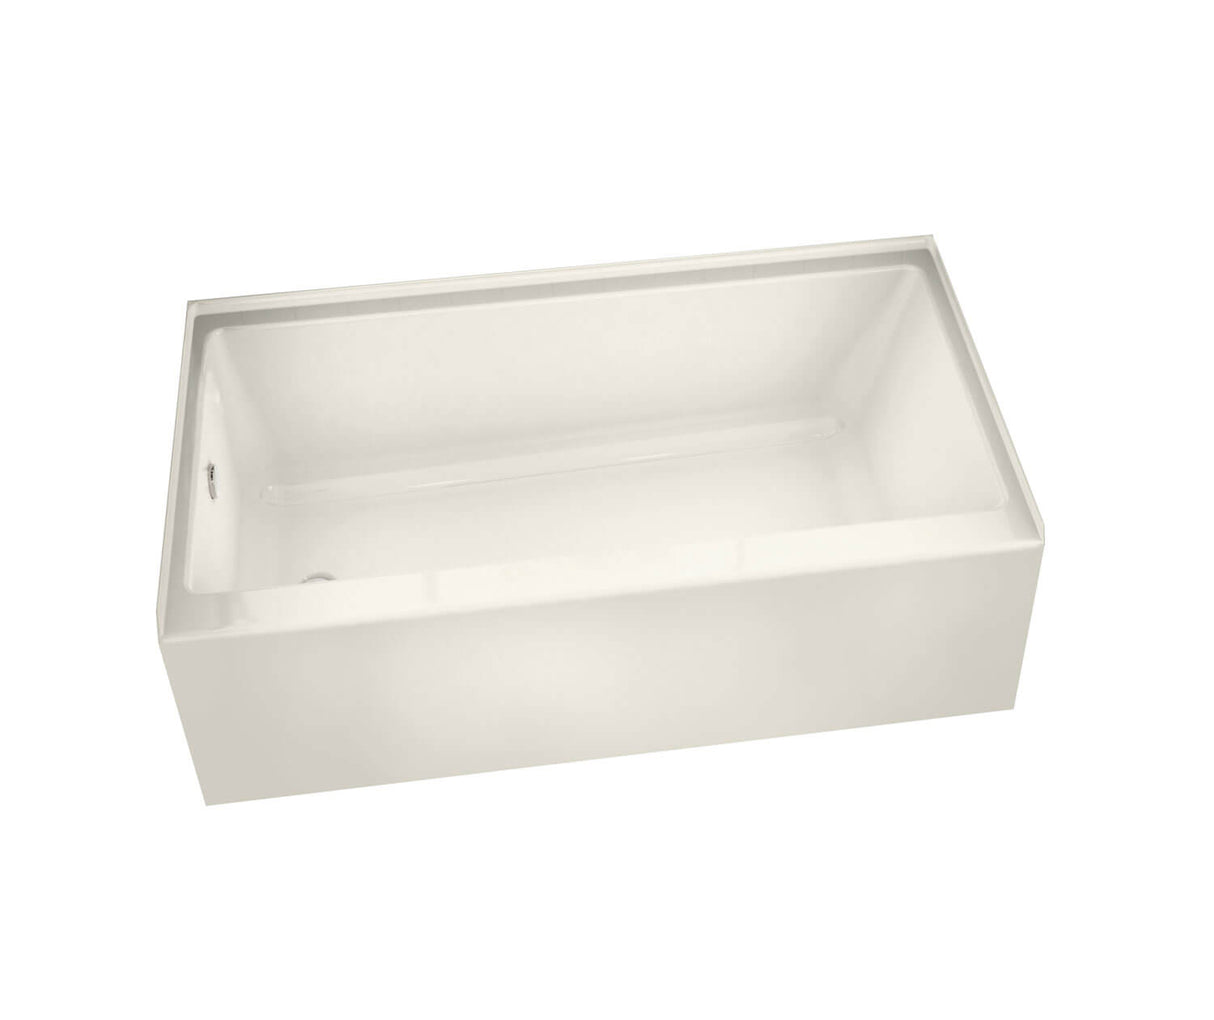 MAAX 105816-L-000-007 Rubix 6030 AFR Acrylic Alcove Left-Hand Drain Bathtub in Biscuit